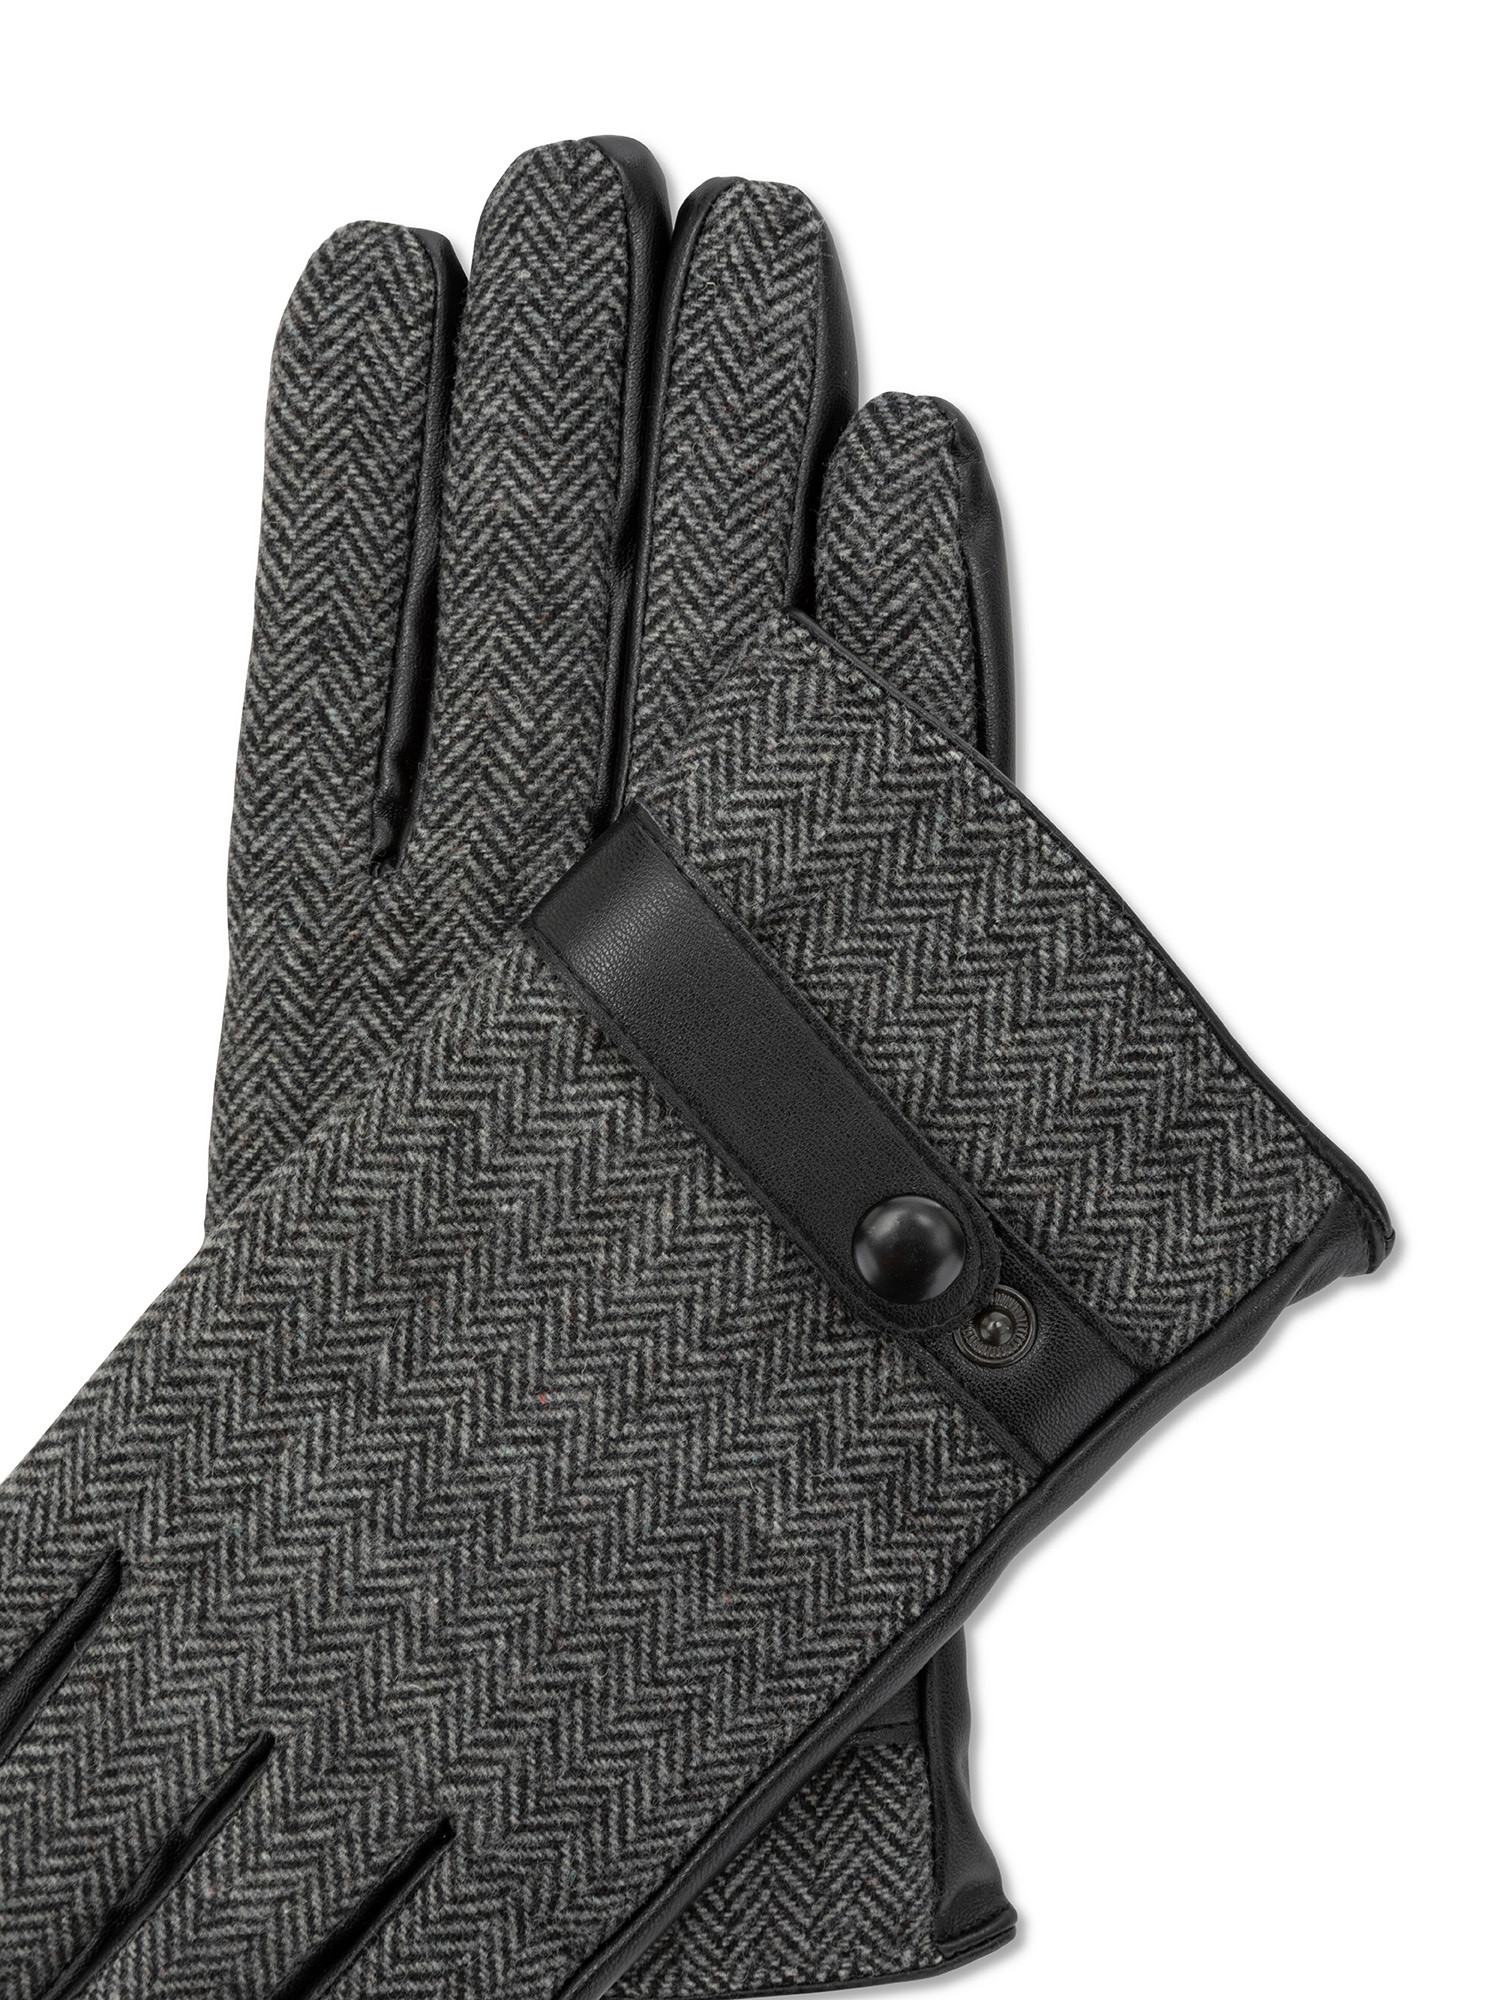 Luca D'Altieri - Gloves with strap, Grey, large image number 1